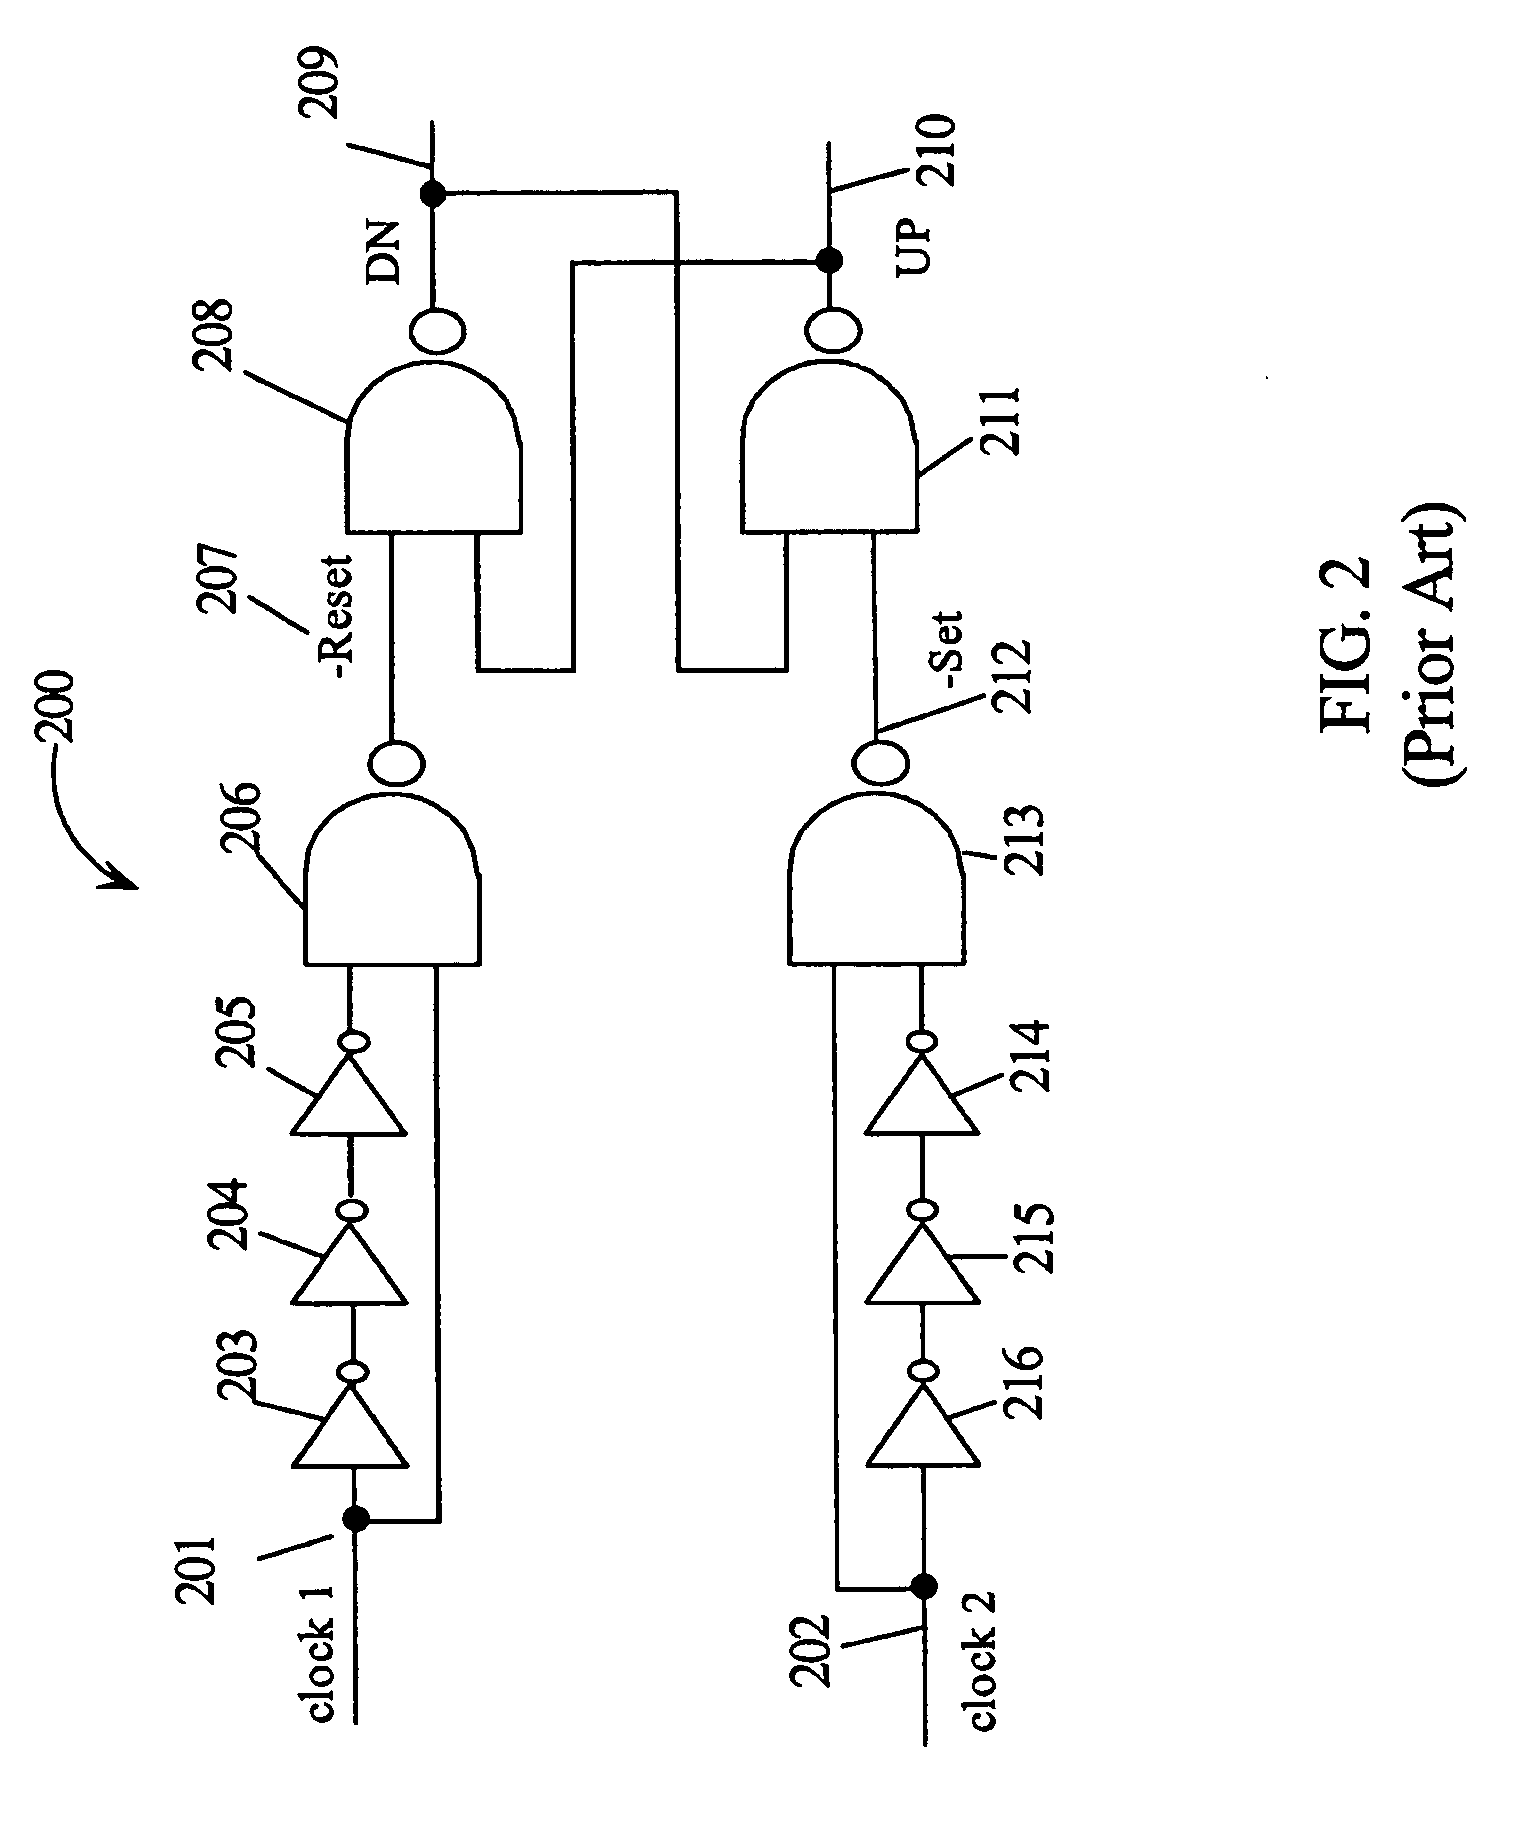 Low power high frequency phase detector